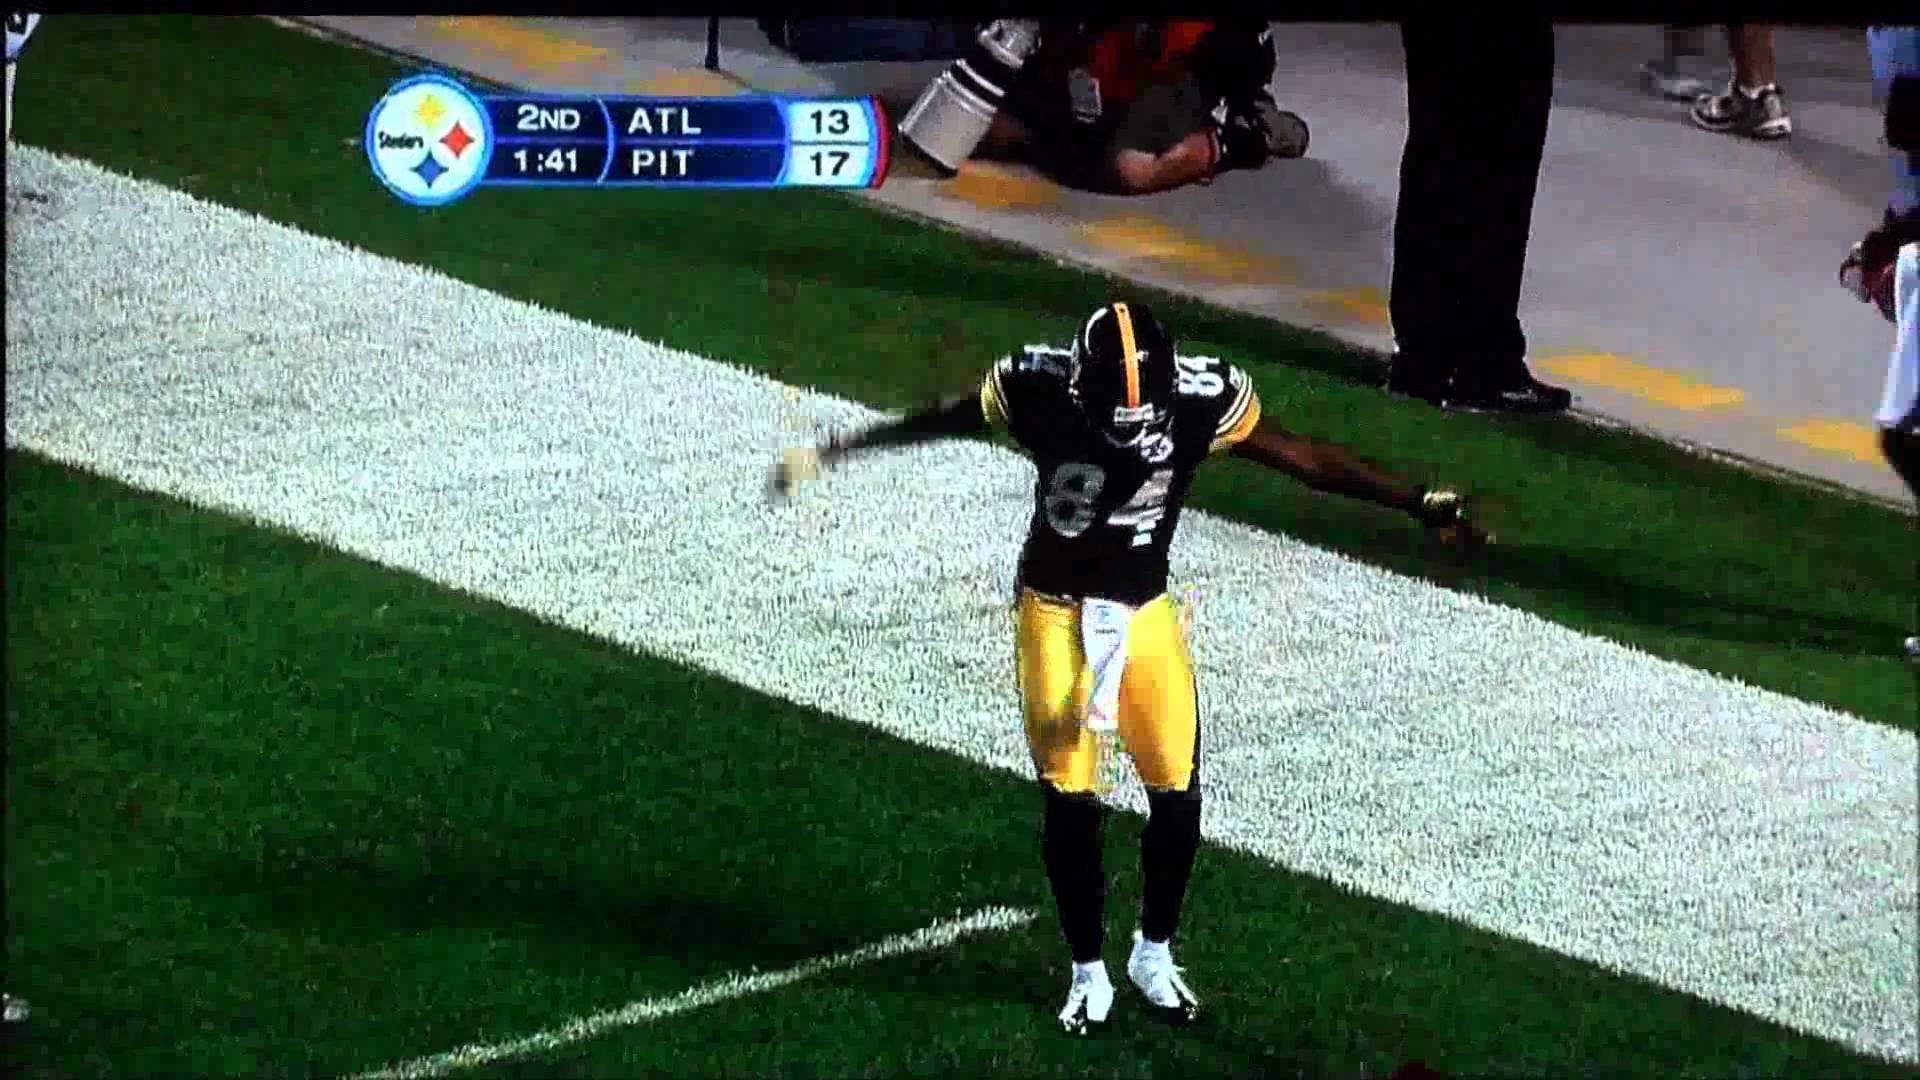 1920x1080 Antonio Brown's touchdown dance video. The best on YouTube!!! - YouTube